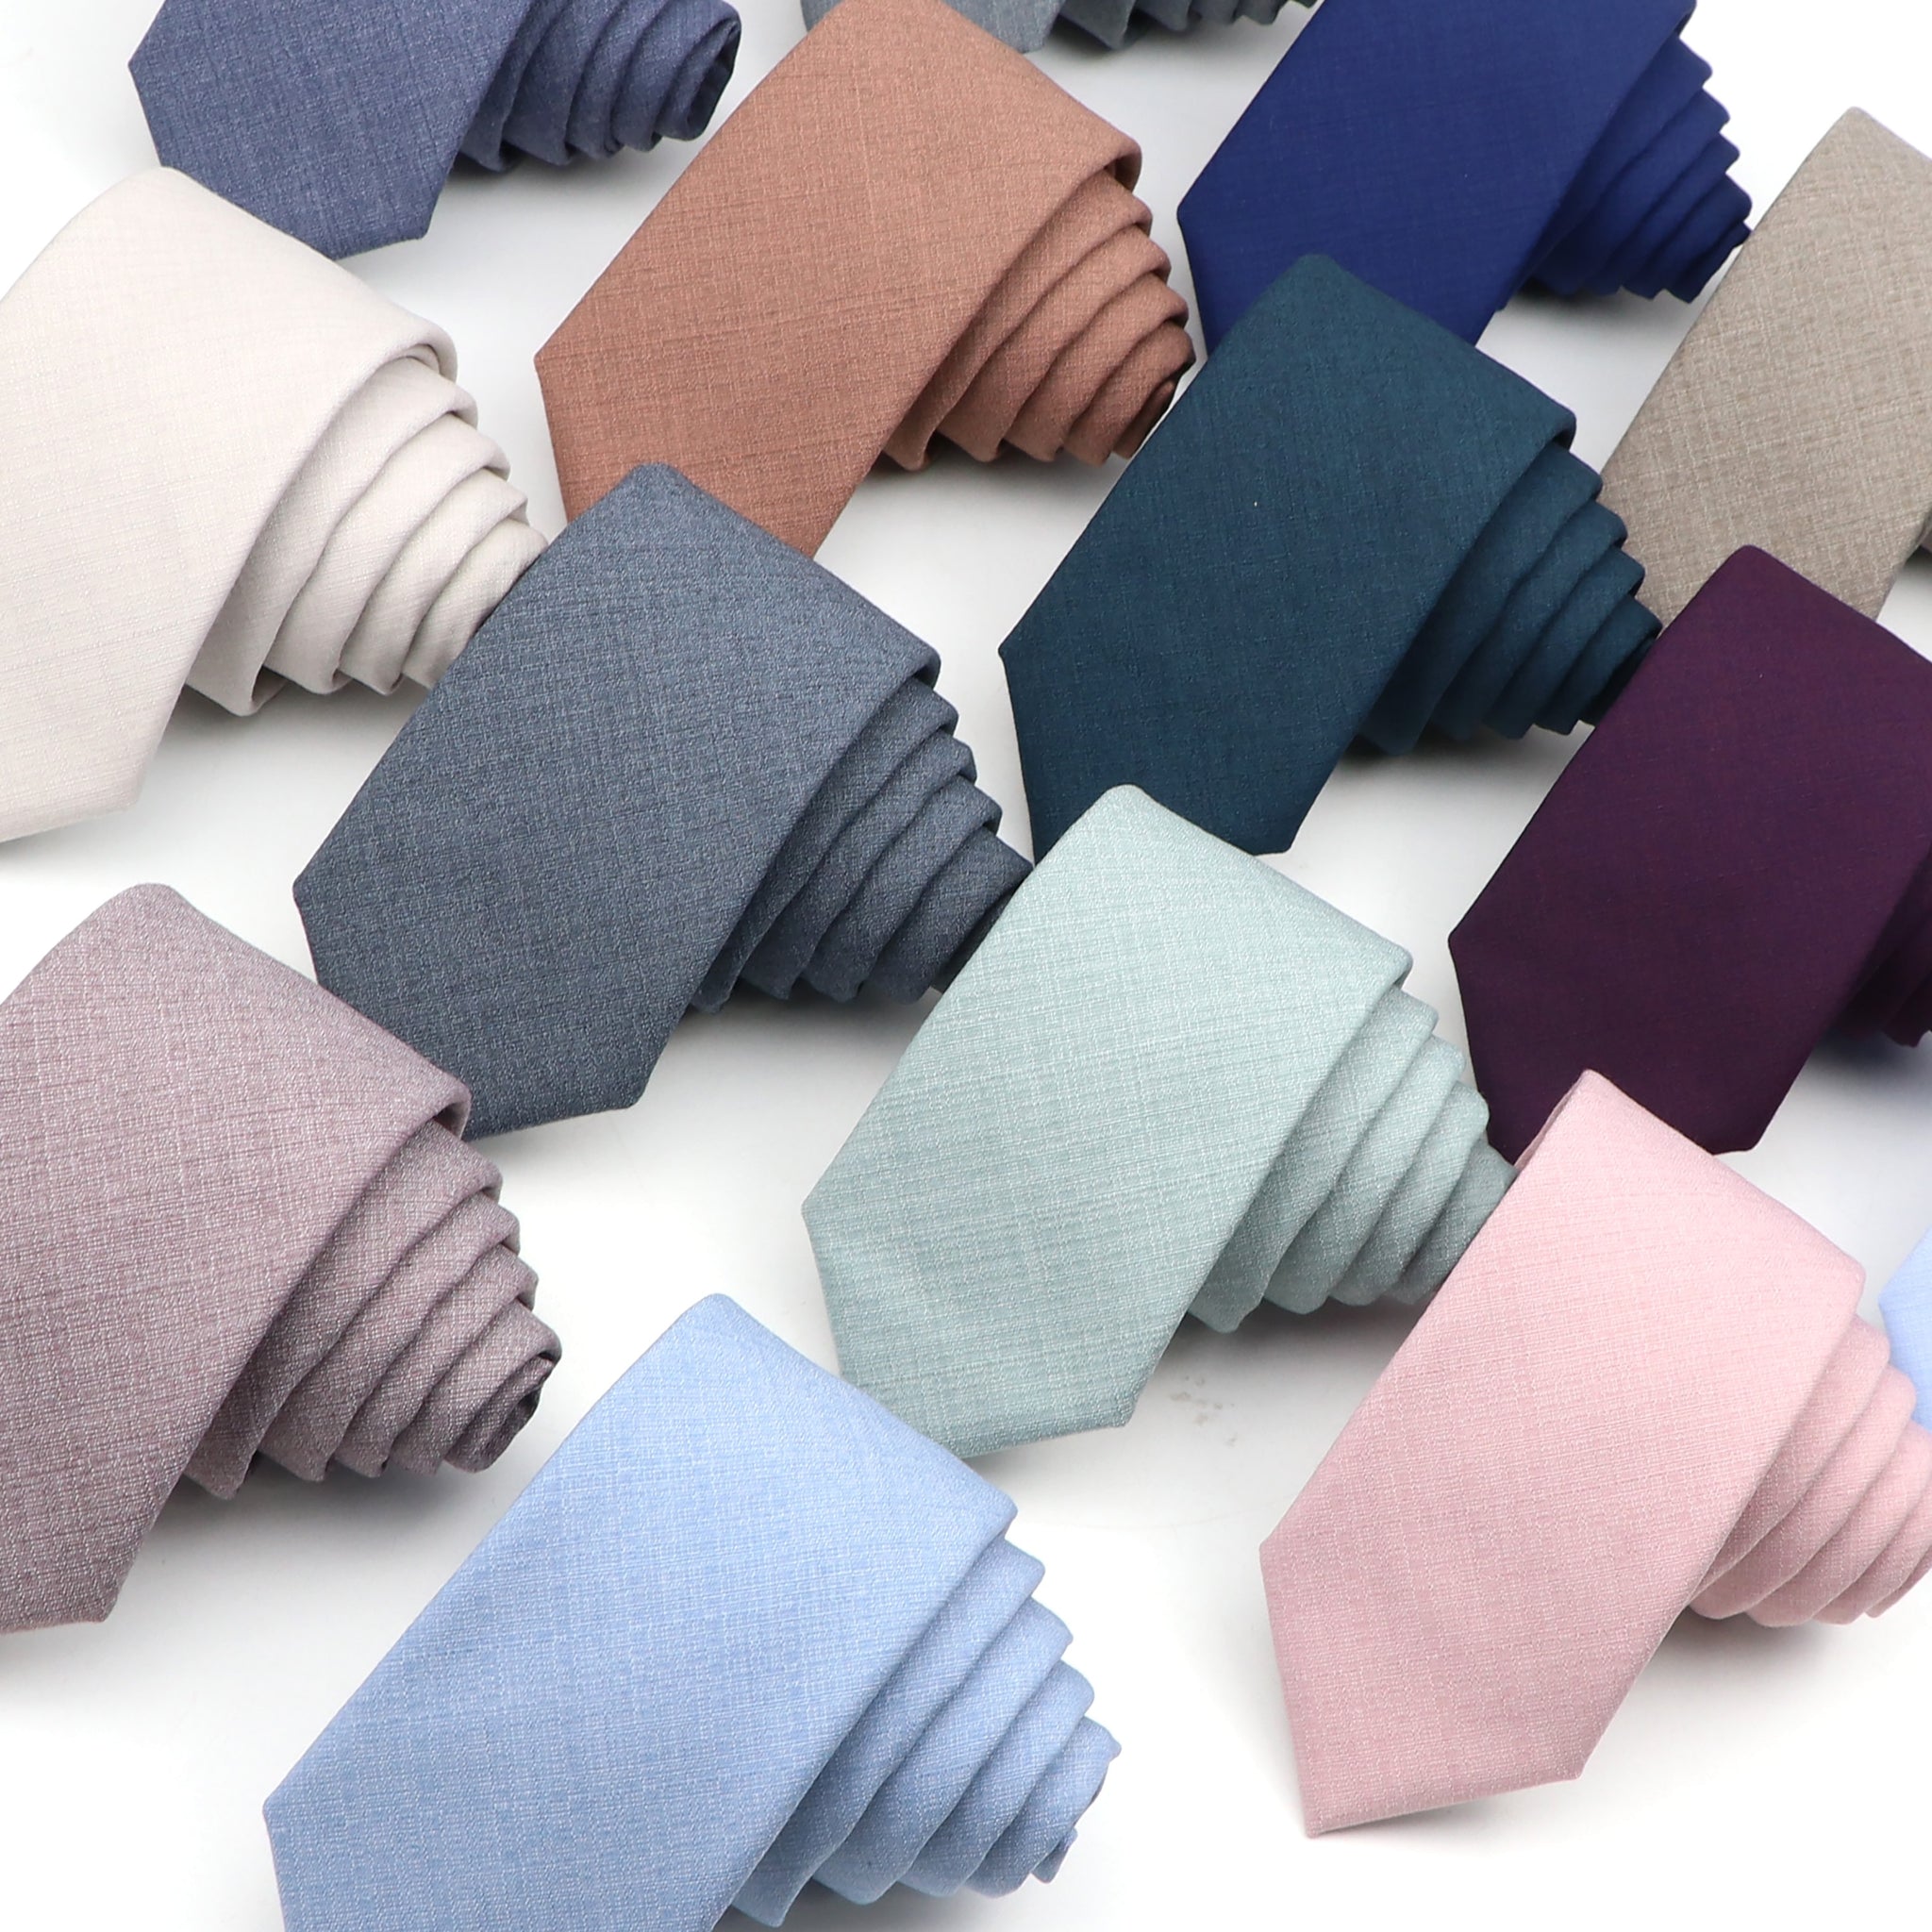 Fashion Neckties Classic Men's Slik Polyester Solid Color Tie For Business Party Wedding Suit Shirt Skinny Neck Ties Accessory